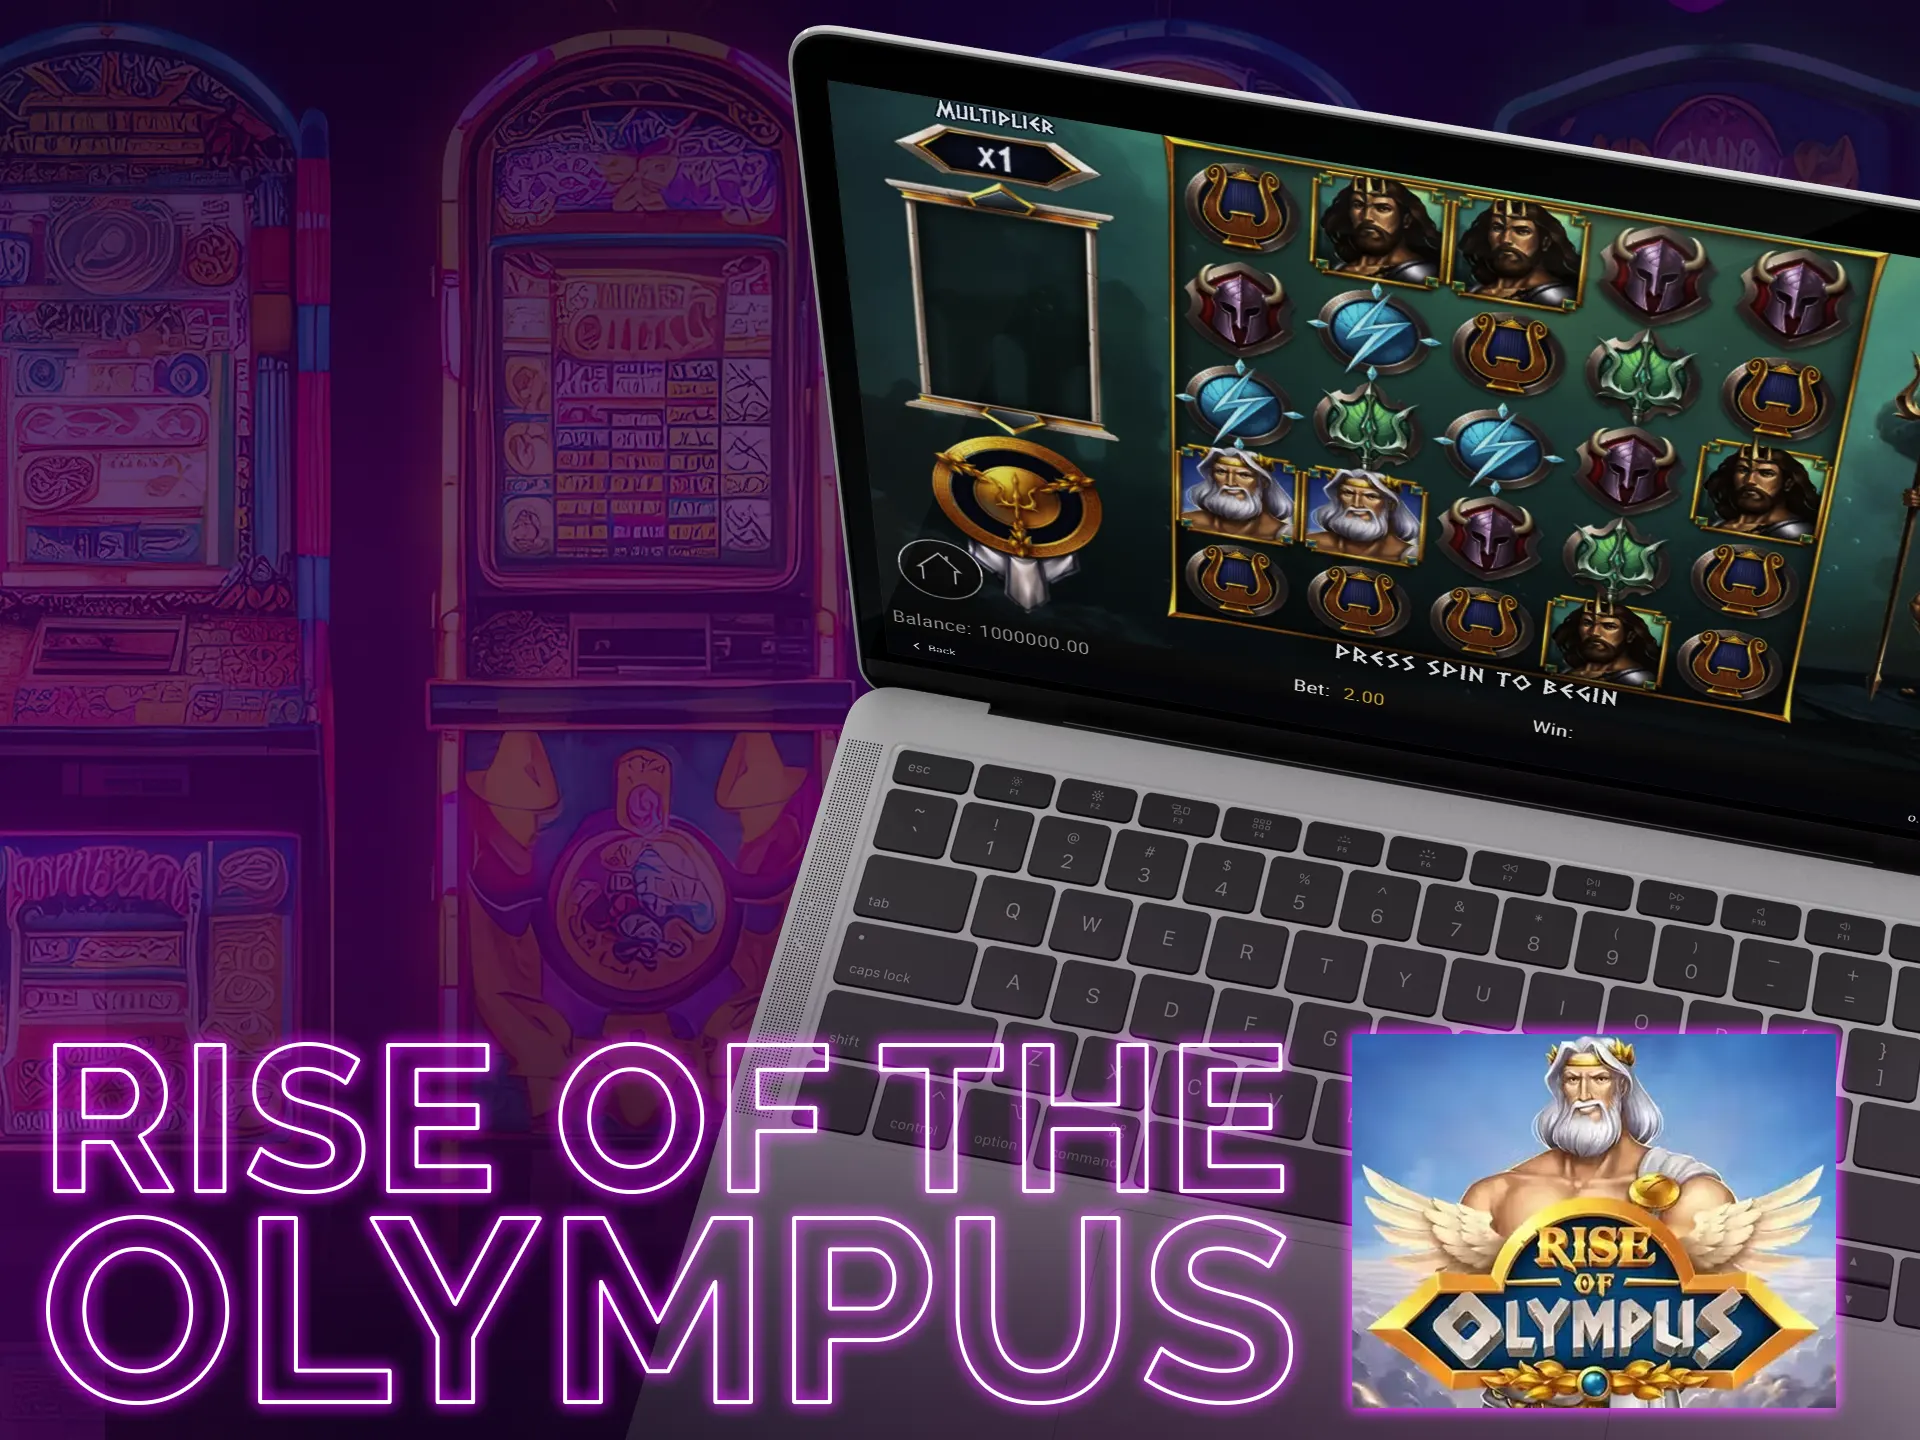 Harness the power of the gods and get huge wins in the Rise of Olympus slot.